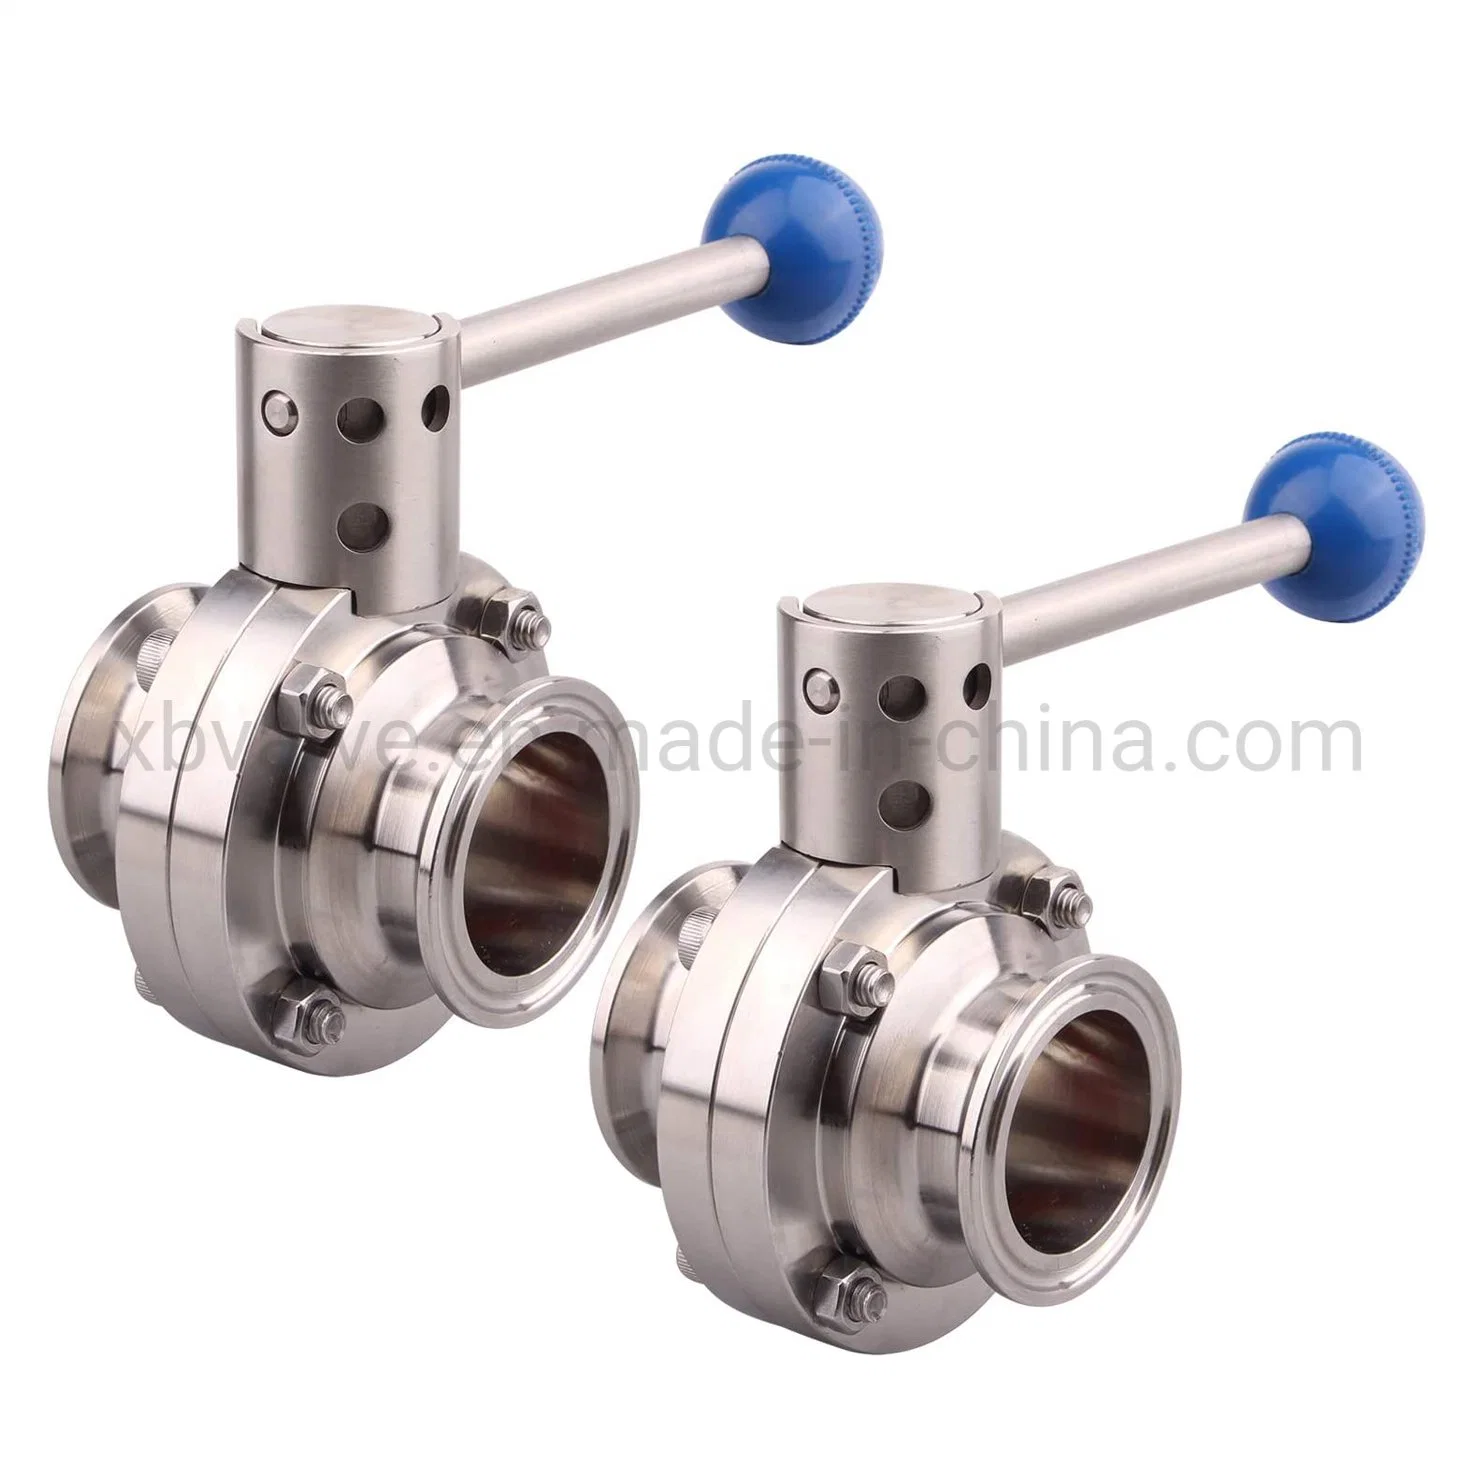 Best Seller High Quality DIN SS316L Tri Clamp Manual Butterfly Valve Food Grade 304 Stainless Steel Ball Valves Chinese Supplier Long Handle Hydraulic Valve